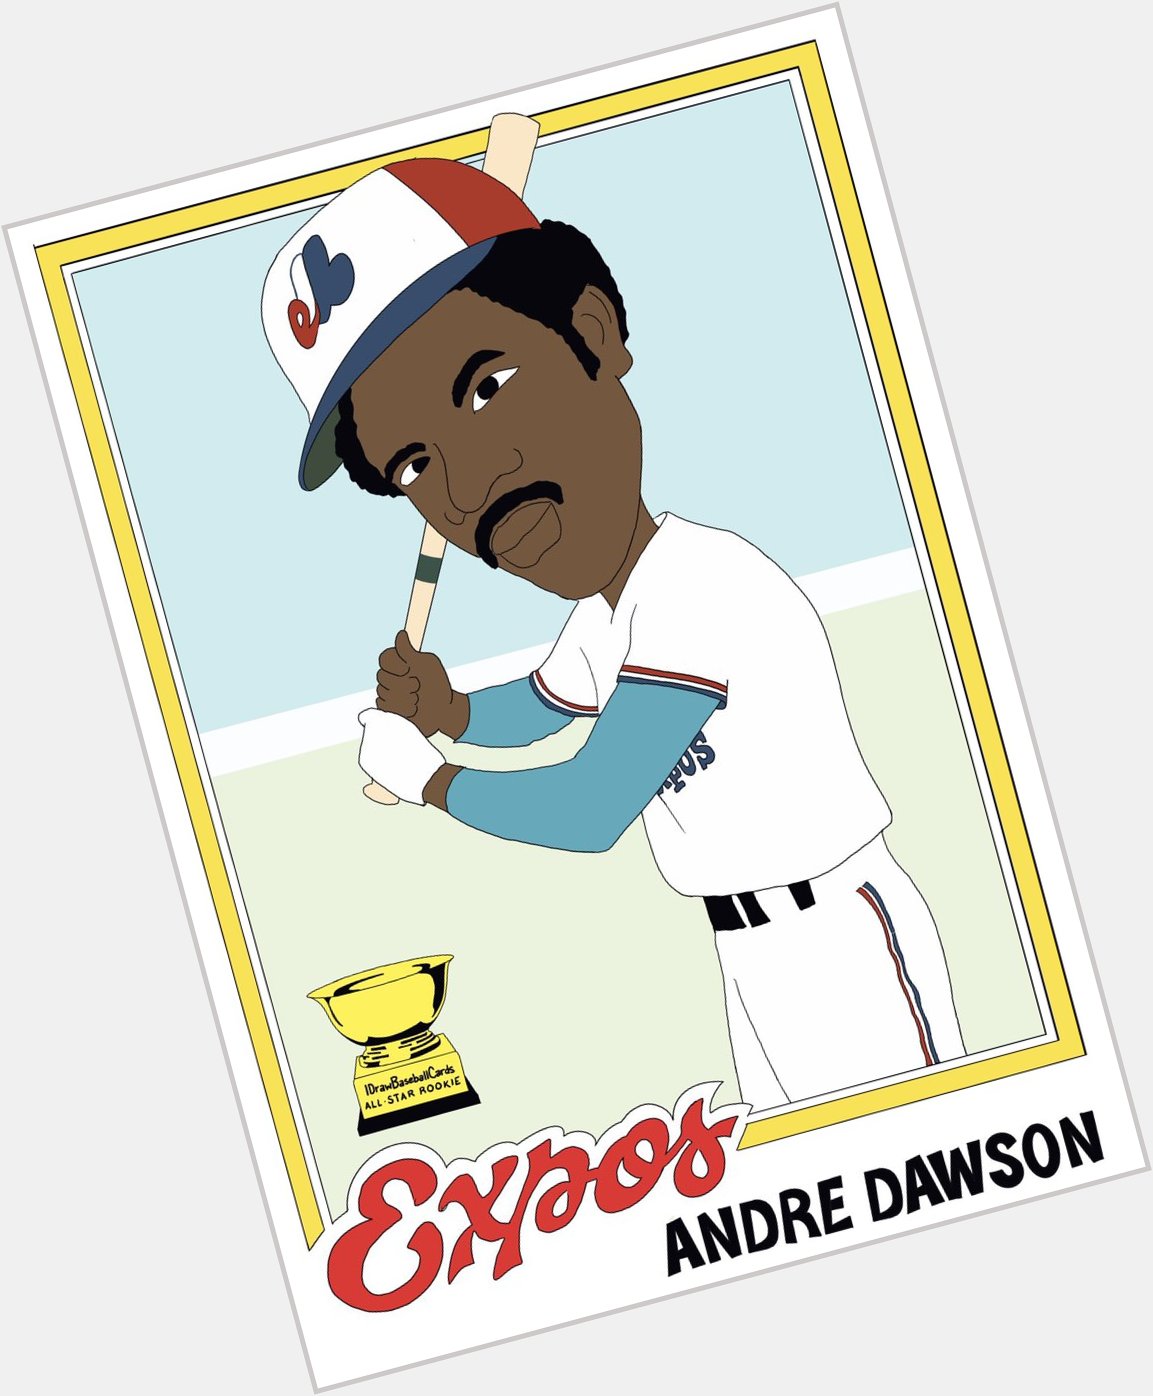 Happy Birthday Andre Dawson.

This card available soon in a new set. 